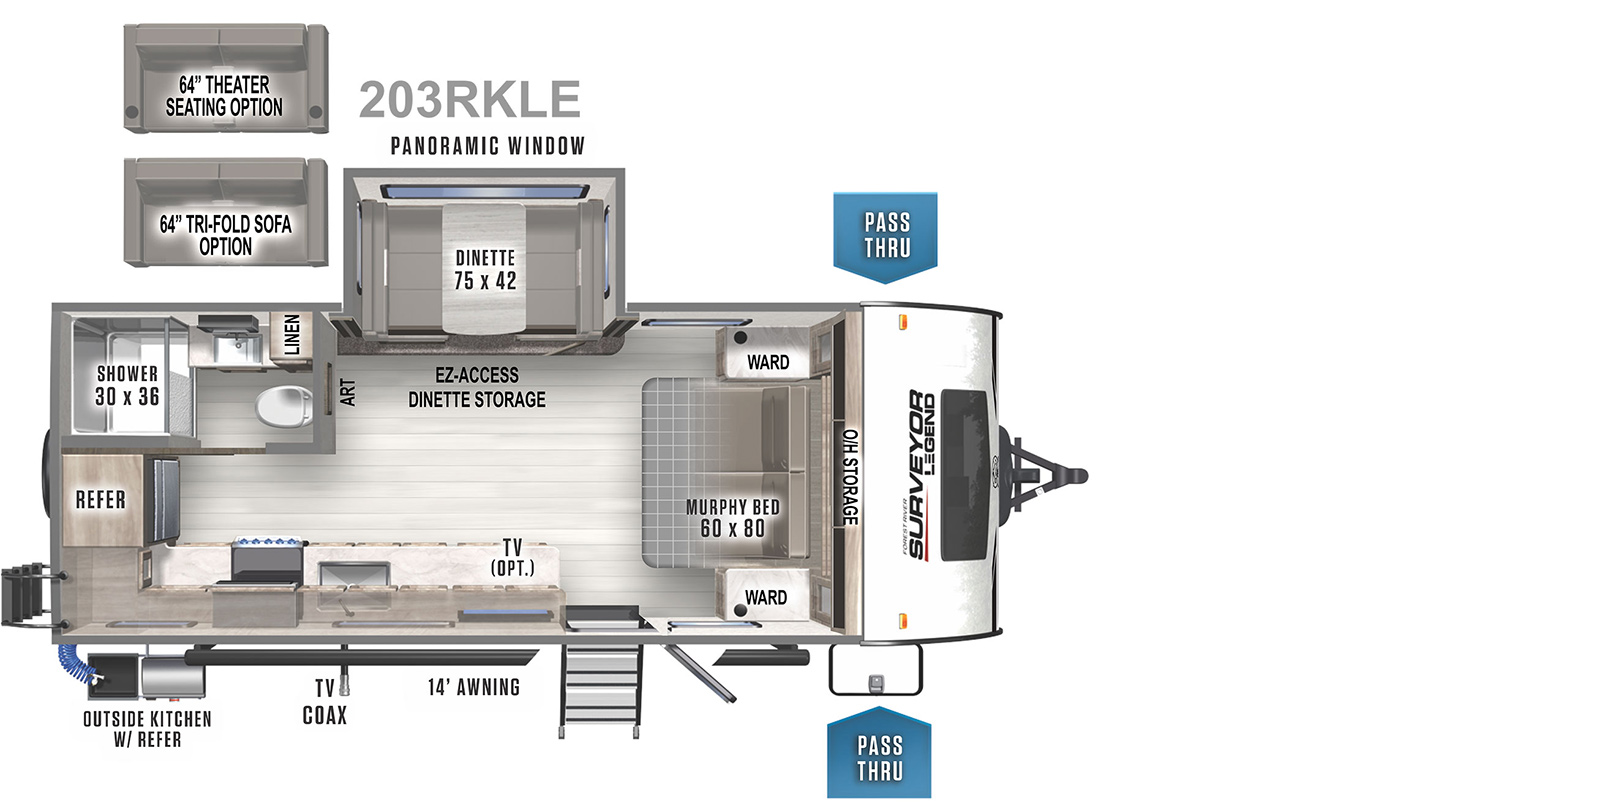 The 203RKLE has one entry door, TV coax connection, outside kitchen with refrigerator, one slide on the off-door side, passthrough storage, and a 14' awning on the exterior. Inside, the front of the unit features a folding murphy-style bed with sofa beneath and wardrobe cabinets on either side. There is a slide room on the off-door side with a panoramic window and 75" x 42" booth dinette with EZ-Access dinette storage. The dinette can be replaced with either a 64" theater seating option or 64" tri-fold sofa option. The bathroom is located next to the slide room, in the right rear right corner, and contains a 30" x 36" shower, sink, linen cabinet, and commode. The kitchen is located on the left wall, across from the slide room, with an optional TV, countertop, single basin stainless-steel sink, cooktop, and oven, with cabinets and a microwave mounted overhead. The refrigerator is located on the rear wall.  